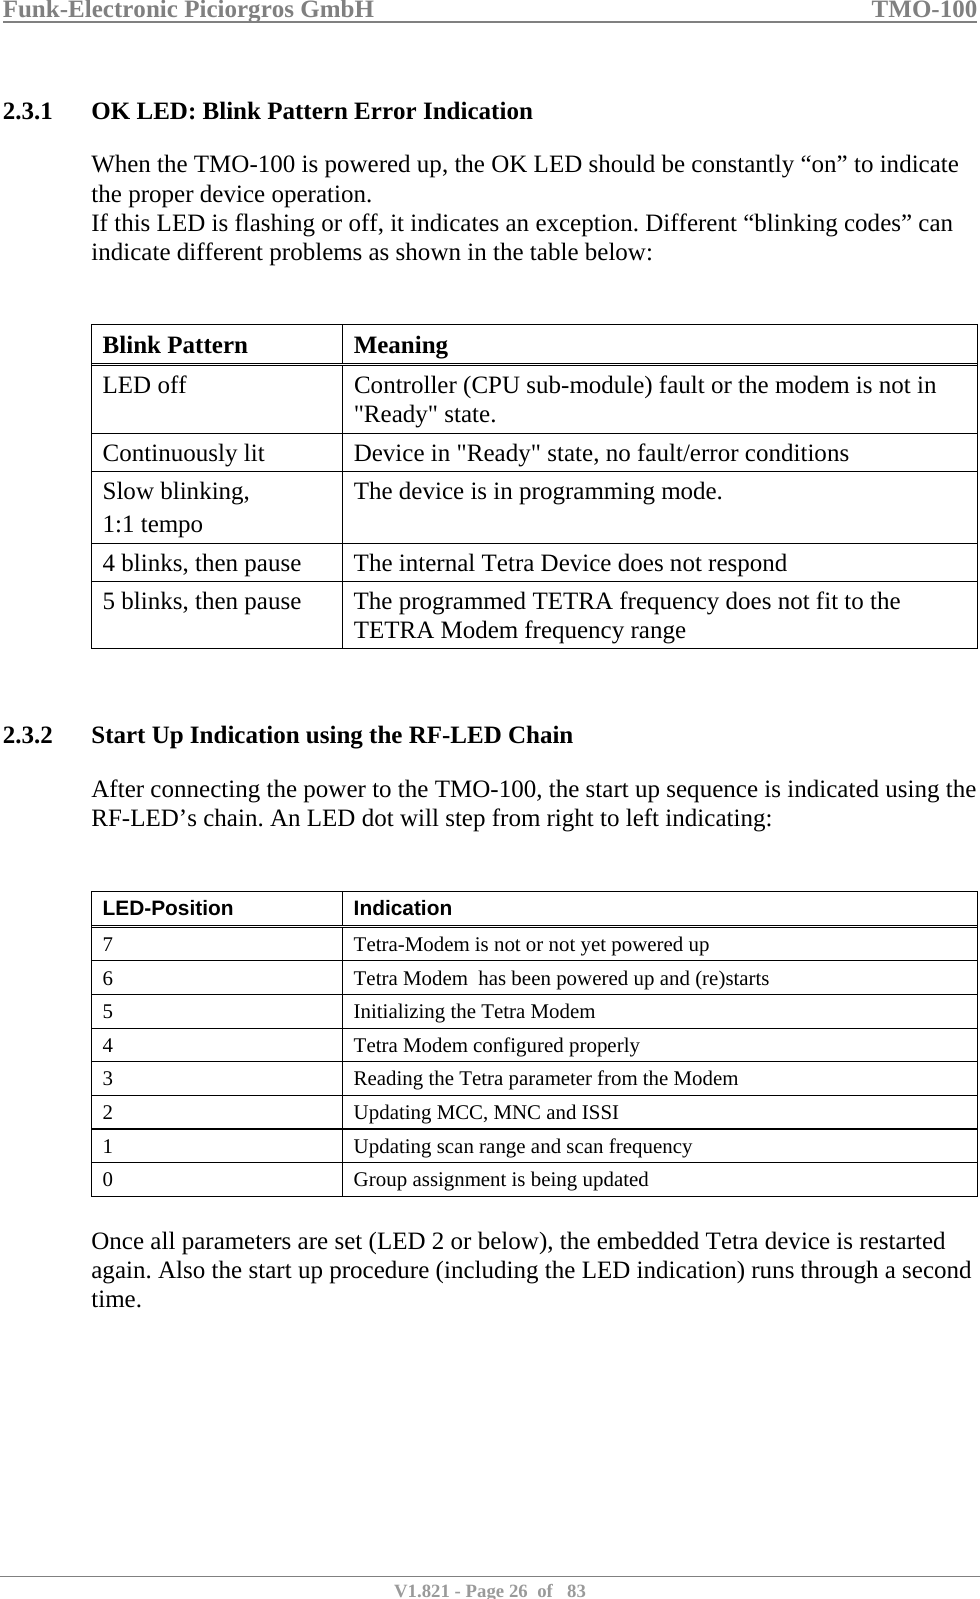 Funk-Electronic Piciorgros GmbH   TMO-100   V1.821 - Page 26  of   83   2.3.1 OK LED: Blink Pattern Error Indication When the TMO-100 is powered up, the OK LED should be constantly “on” to indicate the proper device operation. If this LED is flashing or off, it indicates an exception. Different “blinking codes” can indicate different problems as shown in the table below:   Blink Pattern Meaning LED off  Controller (CPU sub-module) fault or the modem is not in &quot;Ready&quot; state.  Continuously lit  Device in &quot;Ready&quot; state, no fault/error conditions Slow blinking,  1:1 tempo The device is in programming mode. 4 blinks, then pause  The internal Tetra Device does not respond 5 blinks, then pause  The programmed TETRA frequency does not fit to the TETRA Modem frequency range    2.3.2 Start Up Indication using the RF-LED Chain After connecting the power to the TMO-100, the start up sequence is indicated using the RF-LED’s chain. An LED dot will step from right to left indicating:   LED-Position Indication 7  Tetra-Modem is not or not yet powered up 6  Tetra Modem  has been powered up and (re)starts 5  Initializing the Tetra Modem 4  Tetra Modem configured properly 3  Reading the Tetra parameter from the Modem 2  Updating MCC, MNC and ISSI 1  Updating scan range and scan frequency 0  Group assignment is being updated  Once all parameters are set (LED 2 or below), the embedded Tetra device is restarted again. Also the start up procedure (including the LED indication) runs through a second time. 